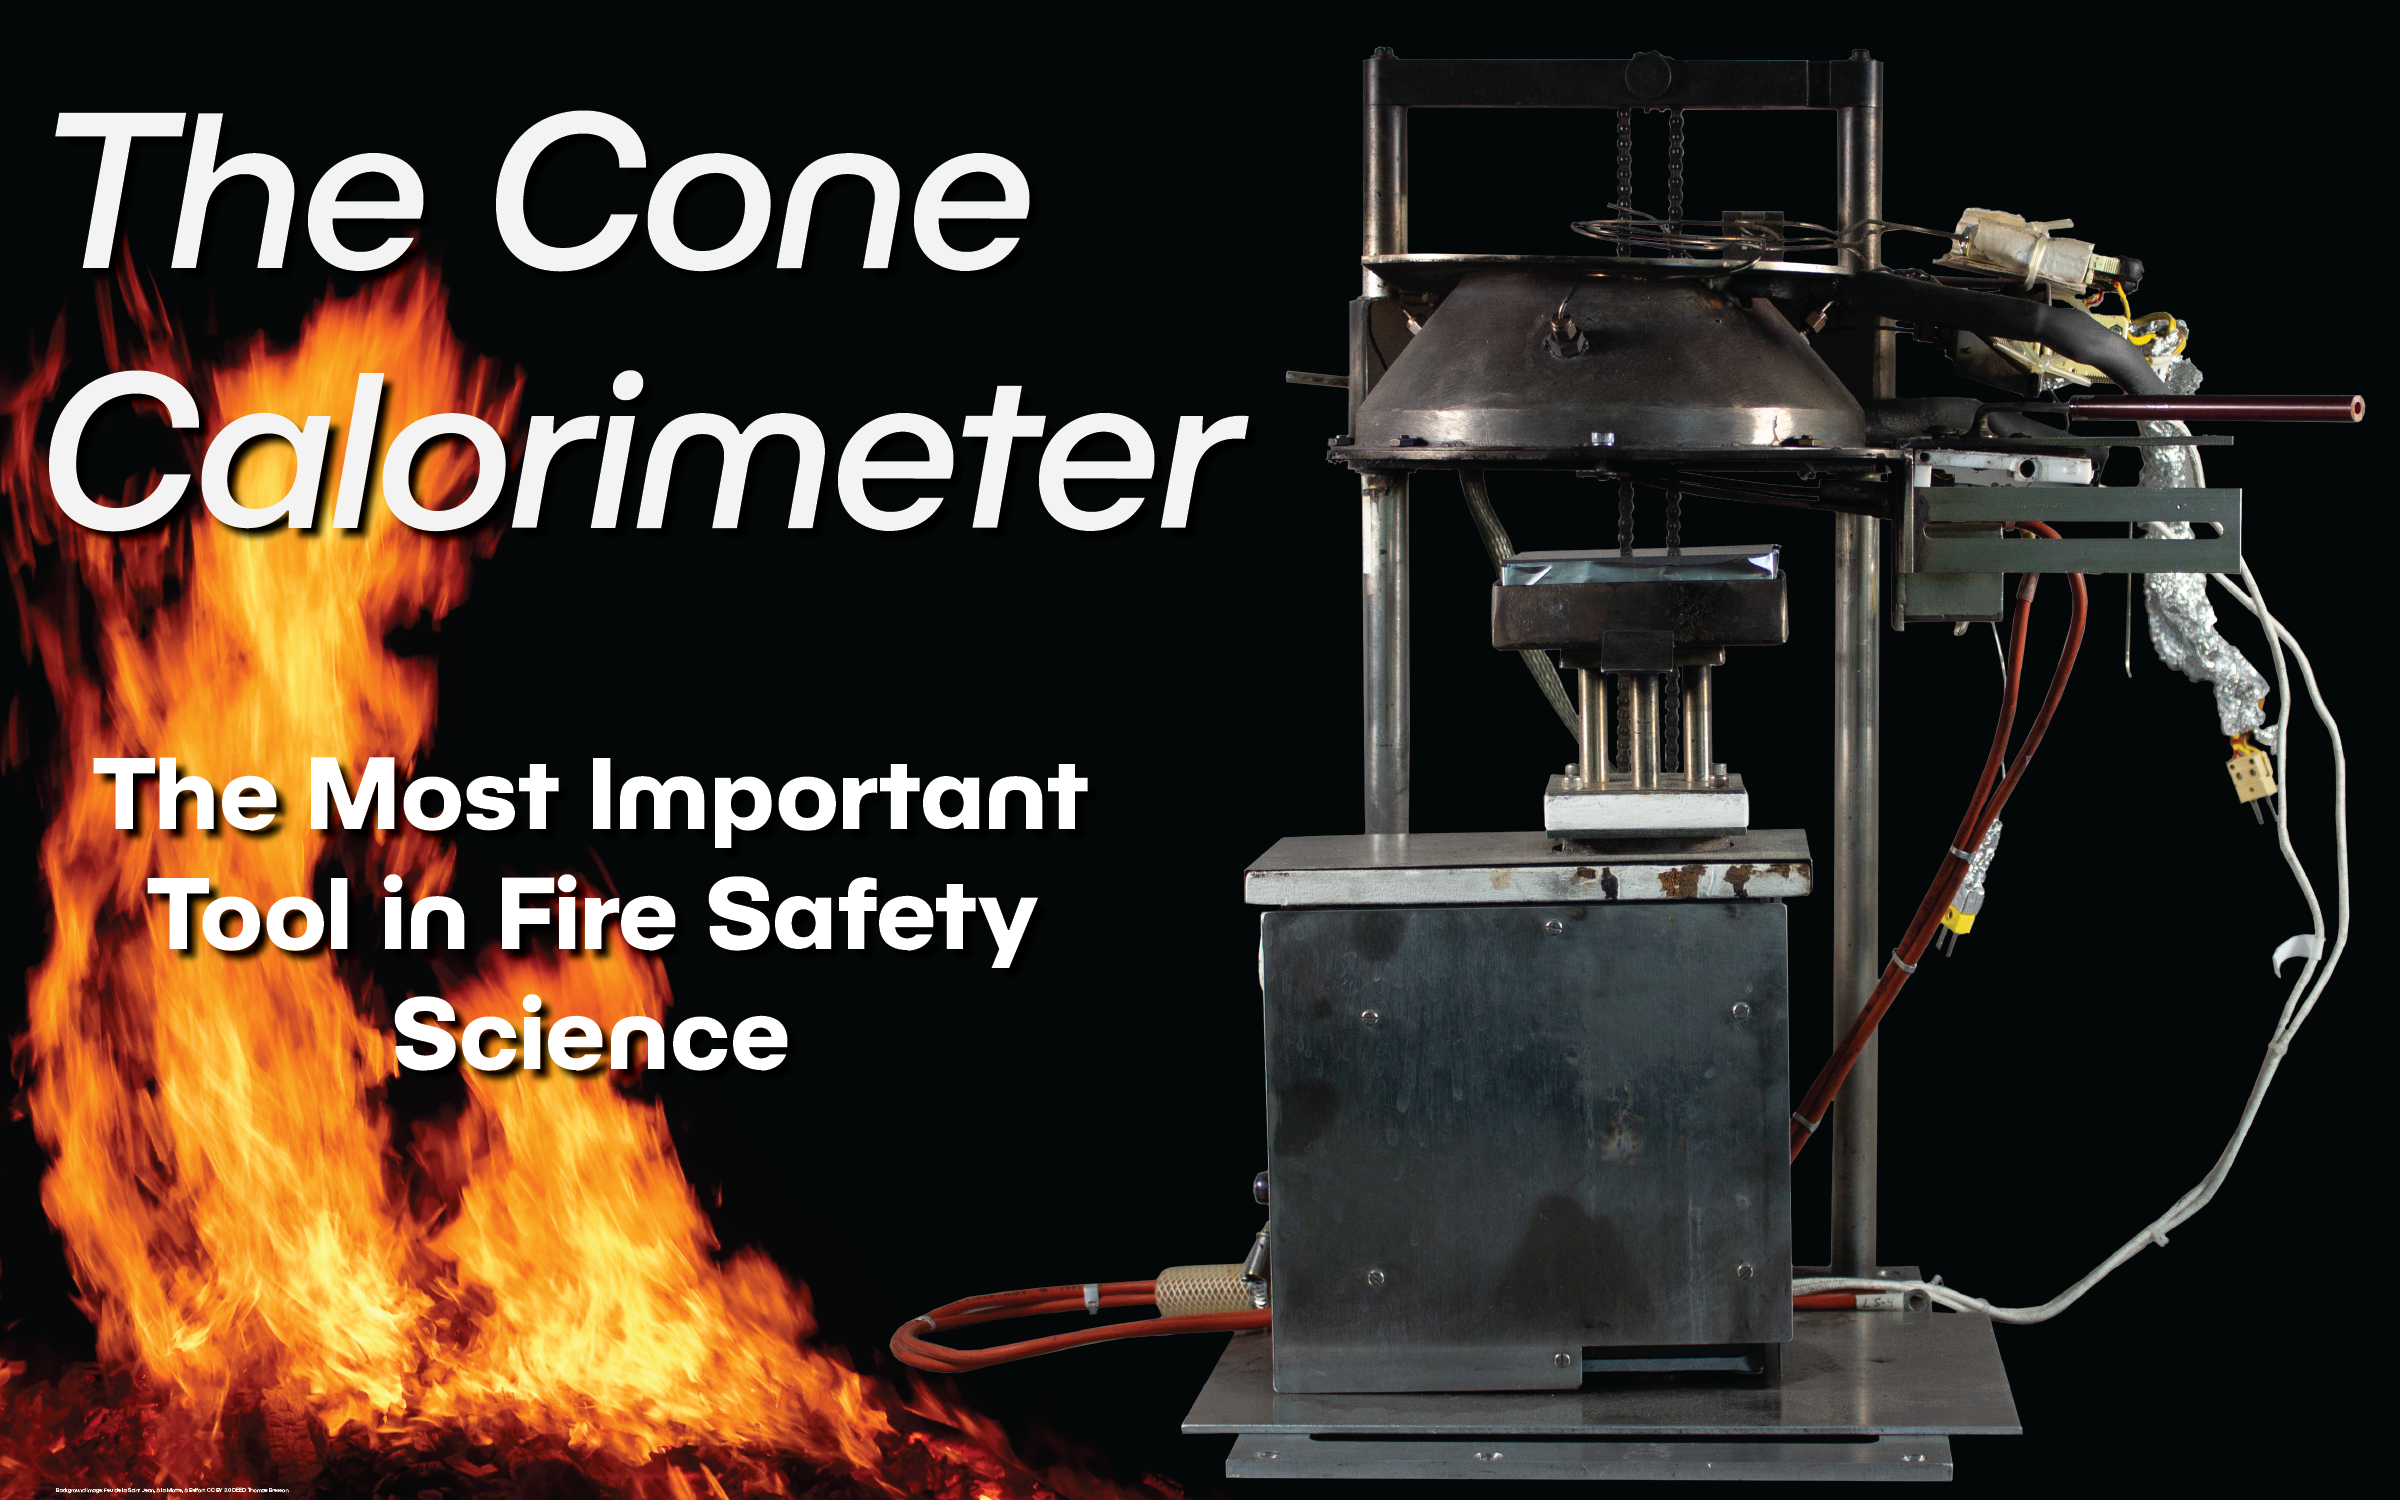 The Cone Calorimeter: The Most Important Tool in Fire Safety Science exhibit title with image of fire and the cone calorimeter device.